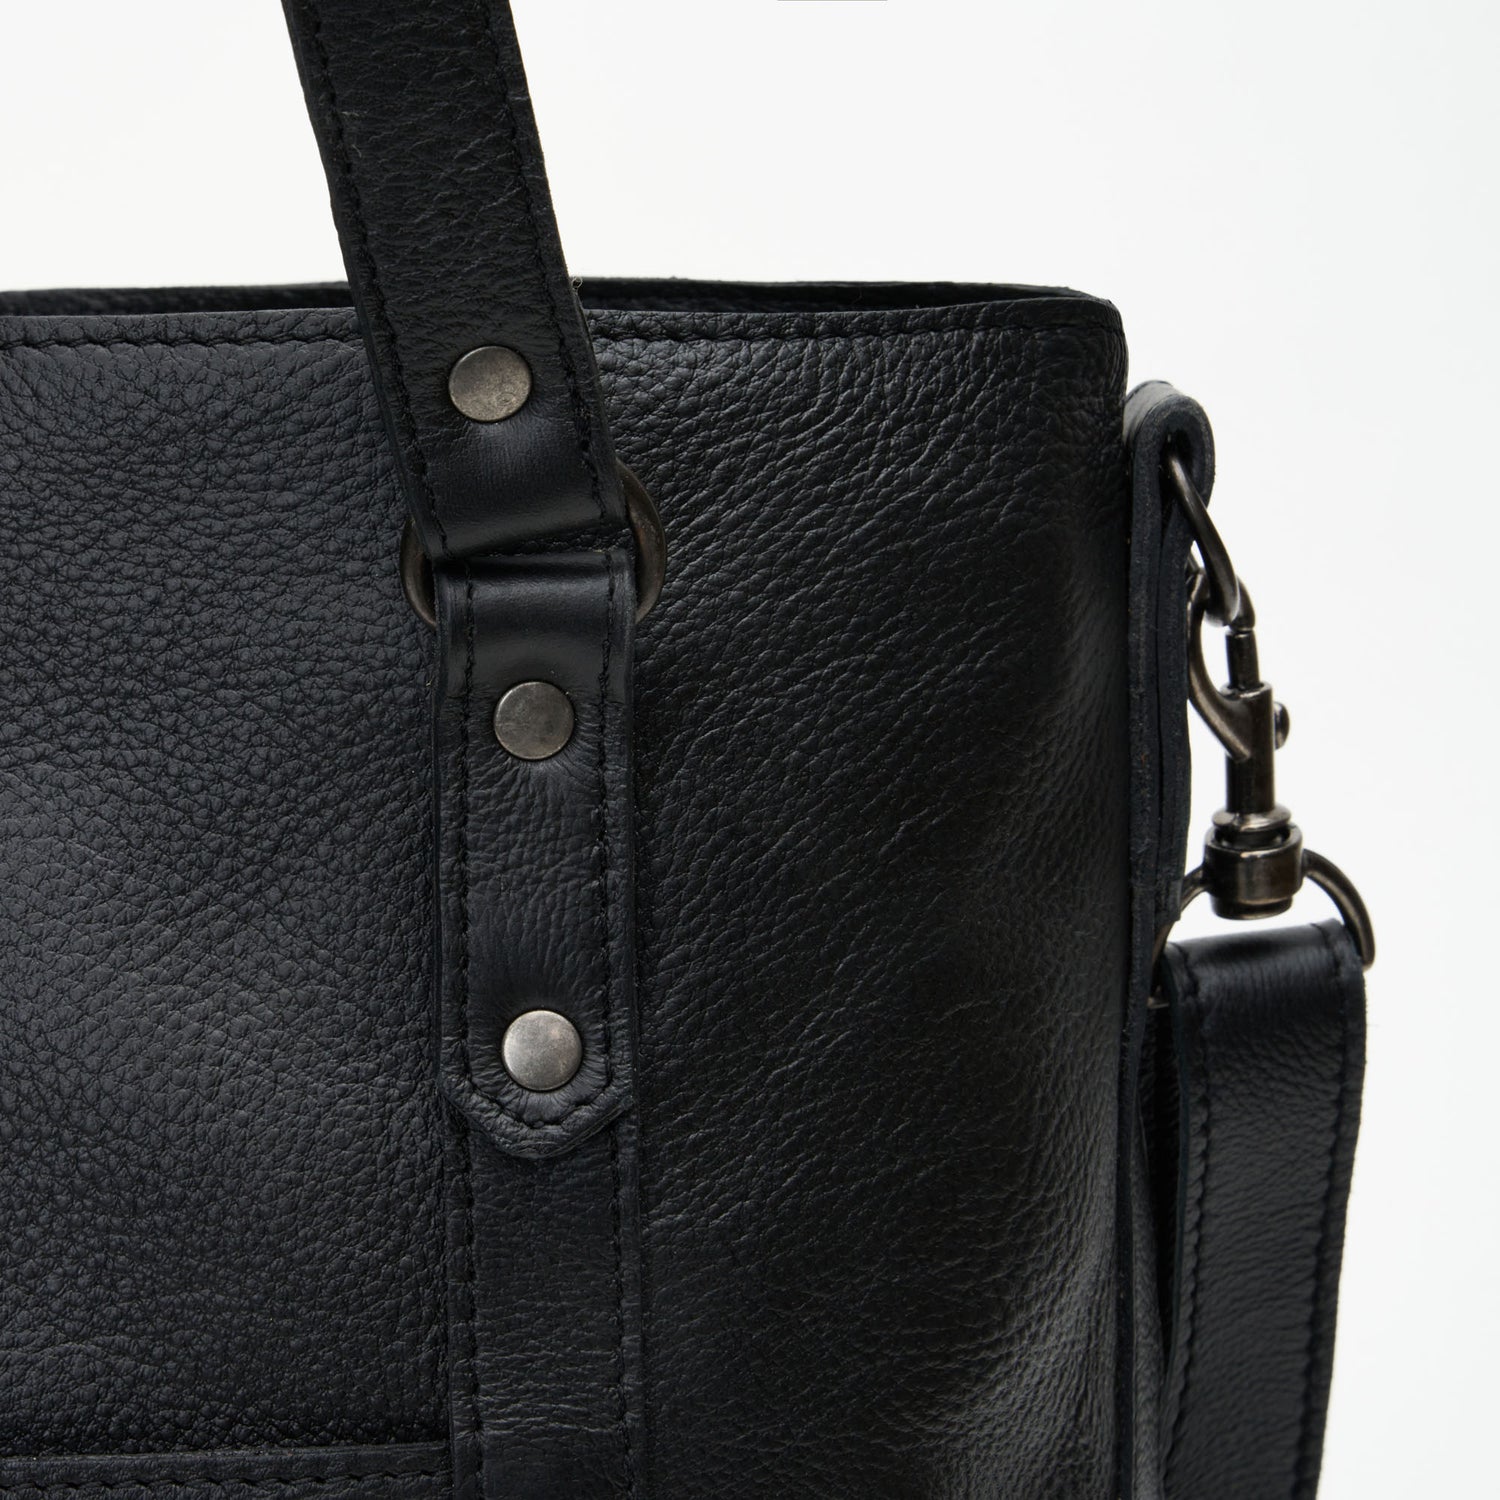 Strap detail for Black Genuine Leather Longline Essie Sling Handbag with Laptop Compartment | Woodstock Leather